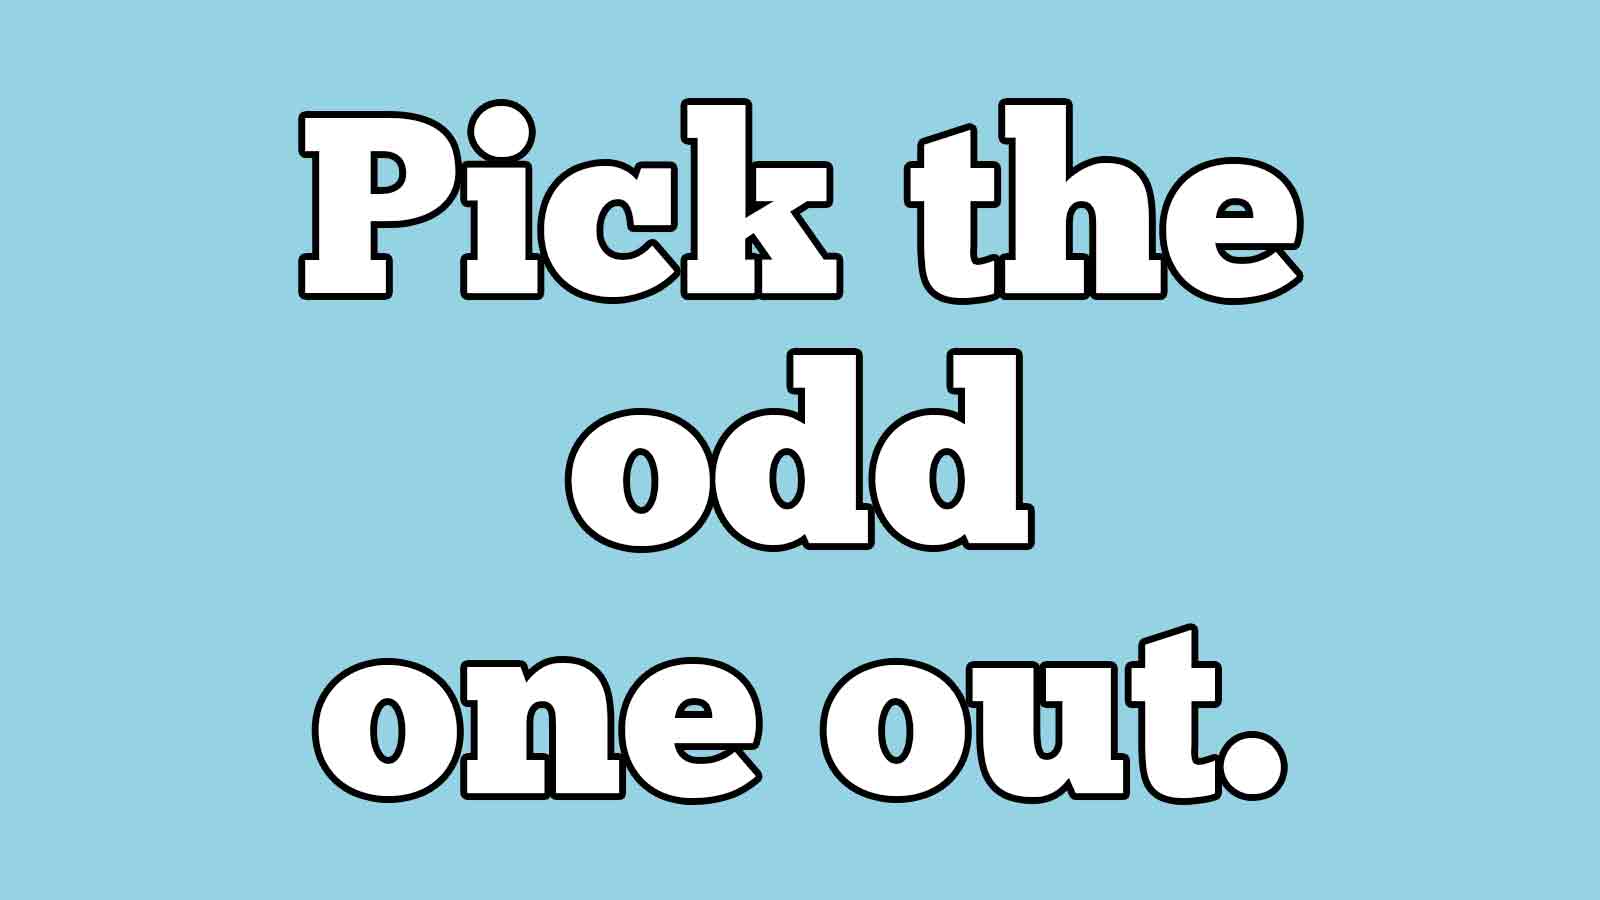 Can You Score 15/15 in This Mildly Infuriating “Odd One Out” Quiz? 534